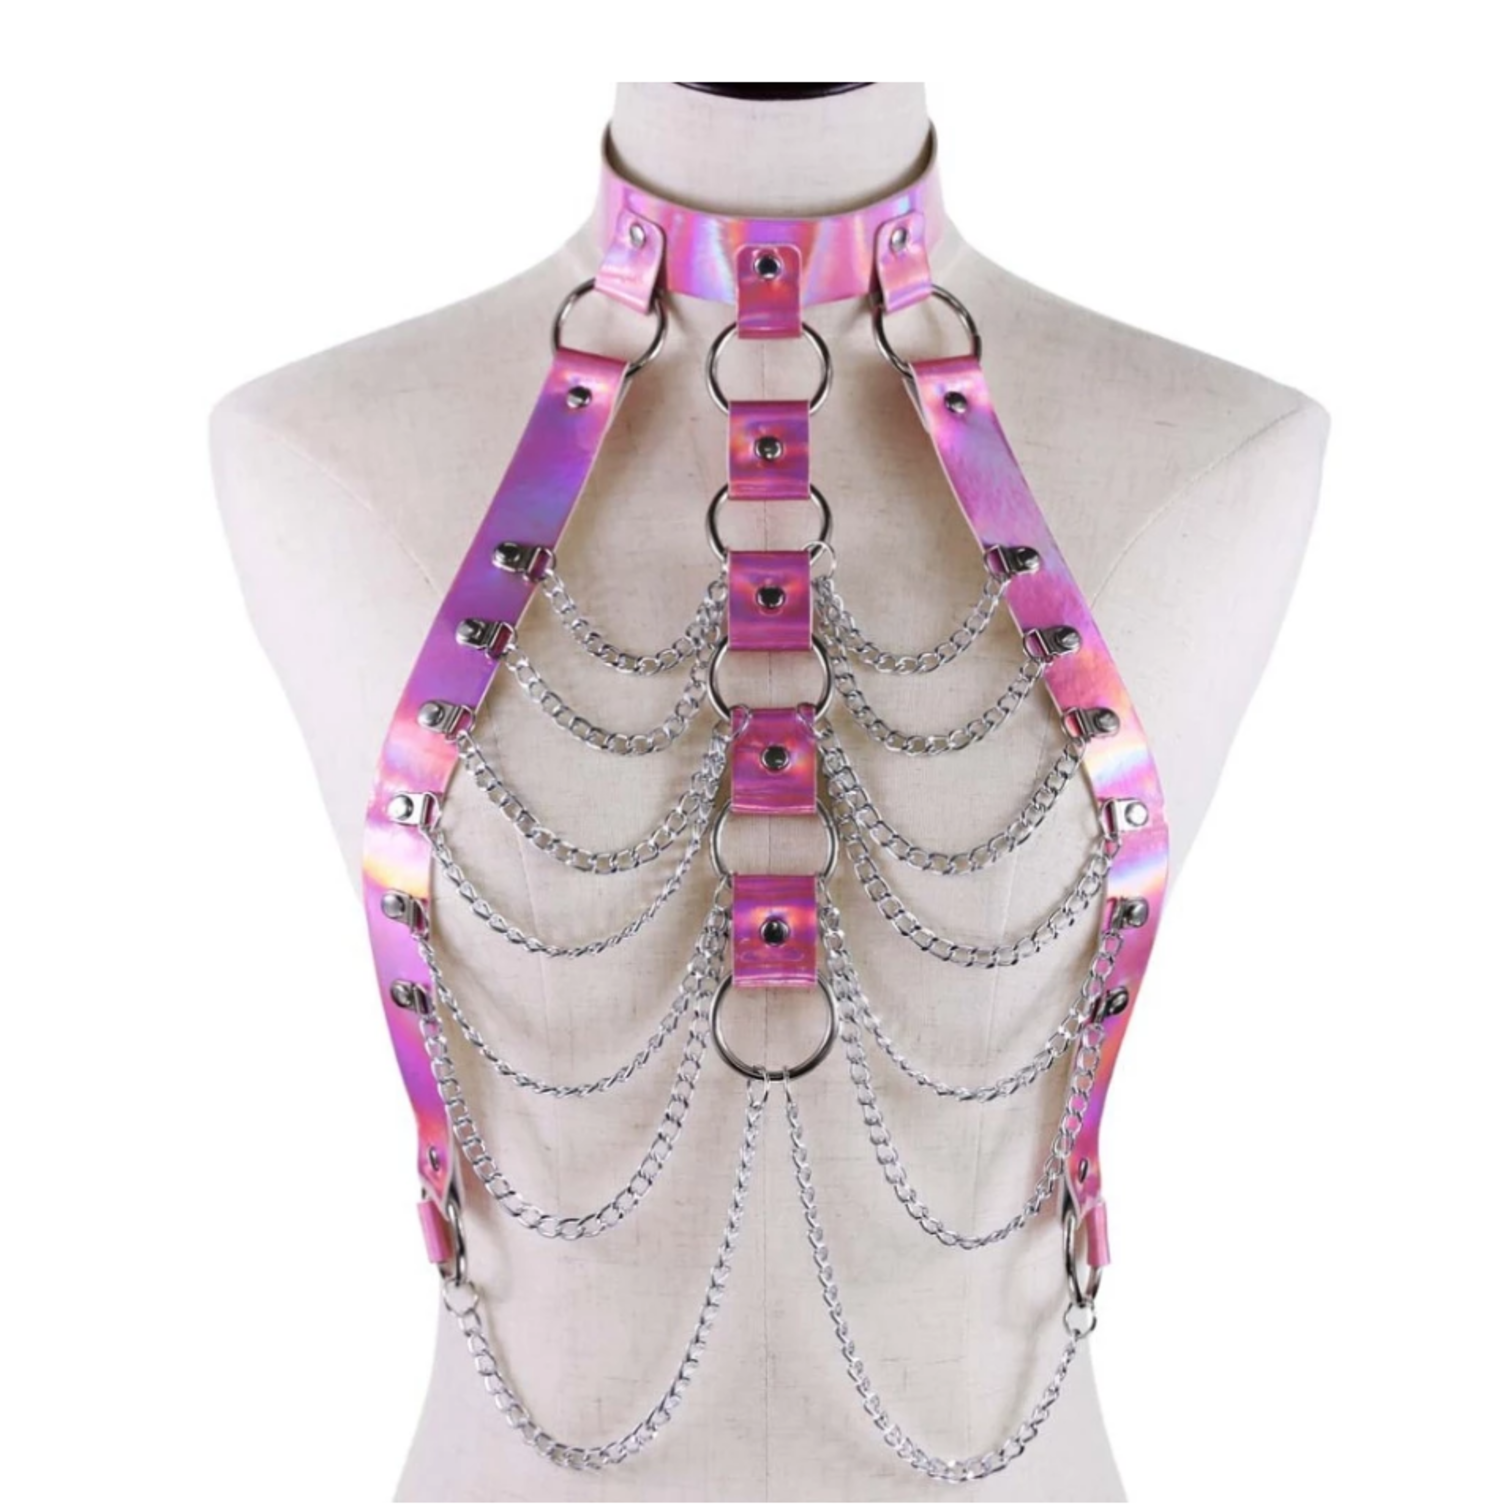 Pink Leather Chain Harness Bra, Woman Bdsm Harness, Chest Harness